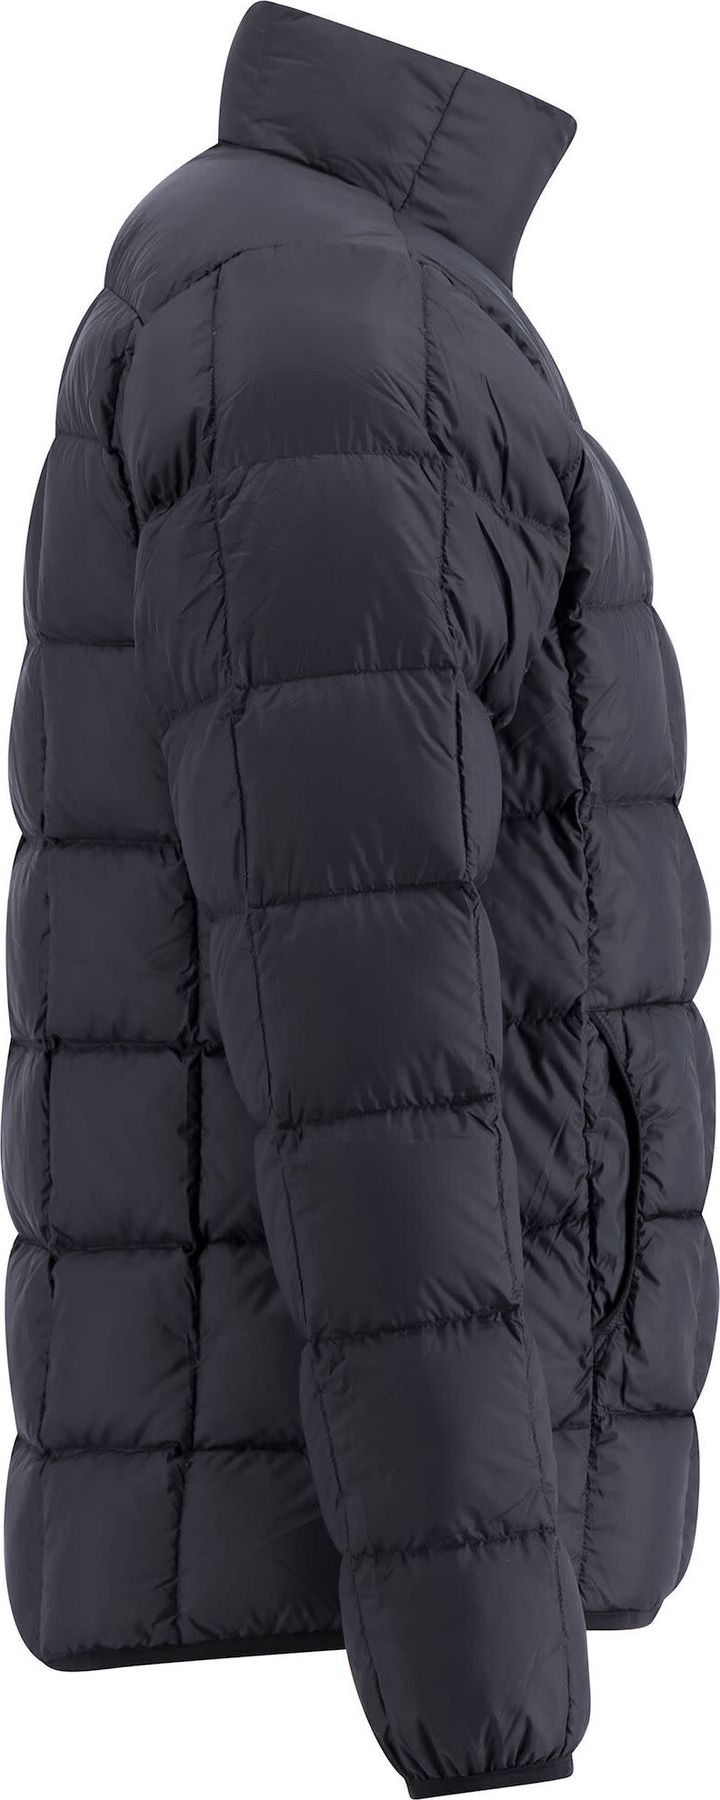 Lundhags Men's Tived Down Jacket Black Lundhags